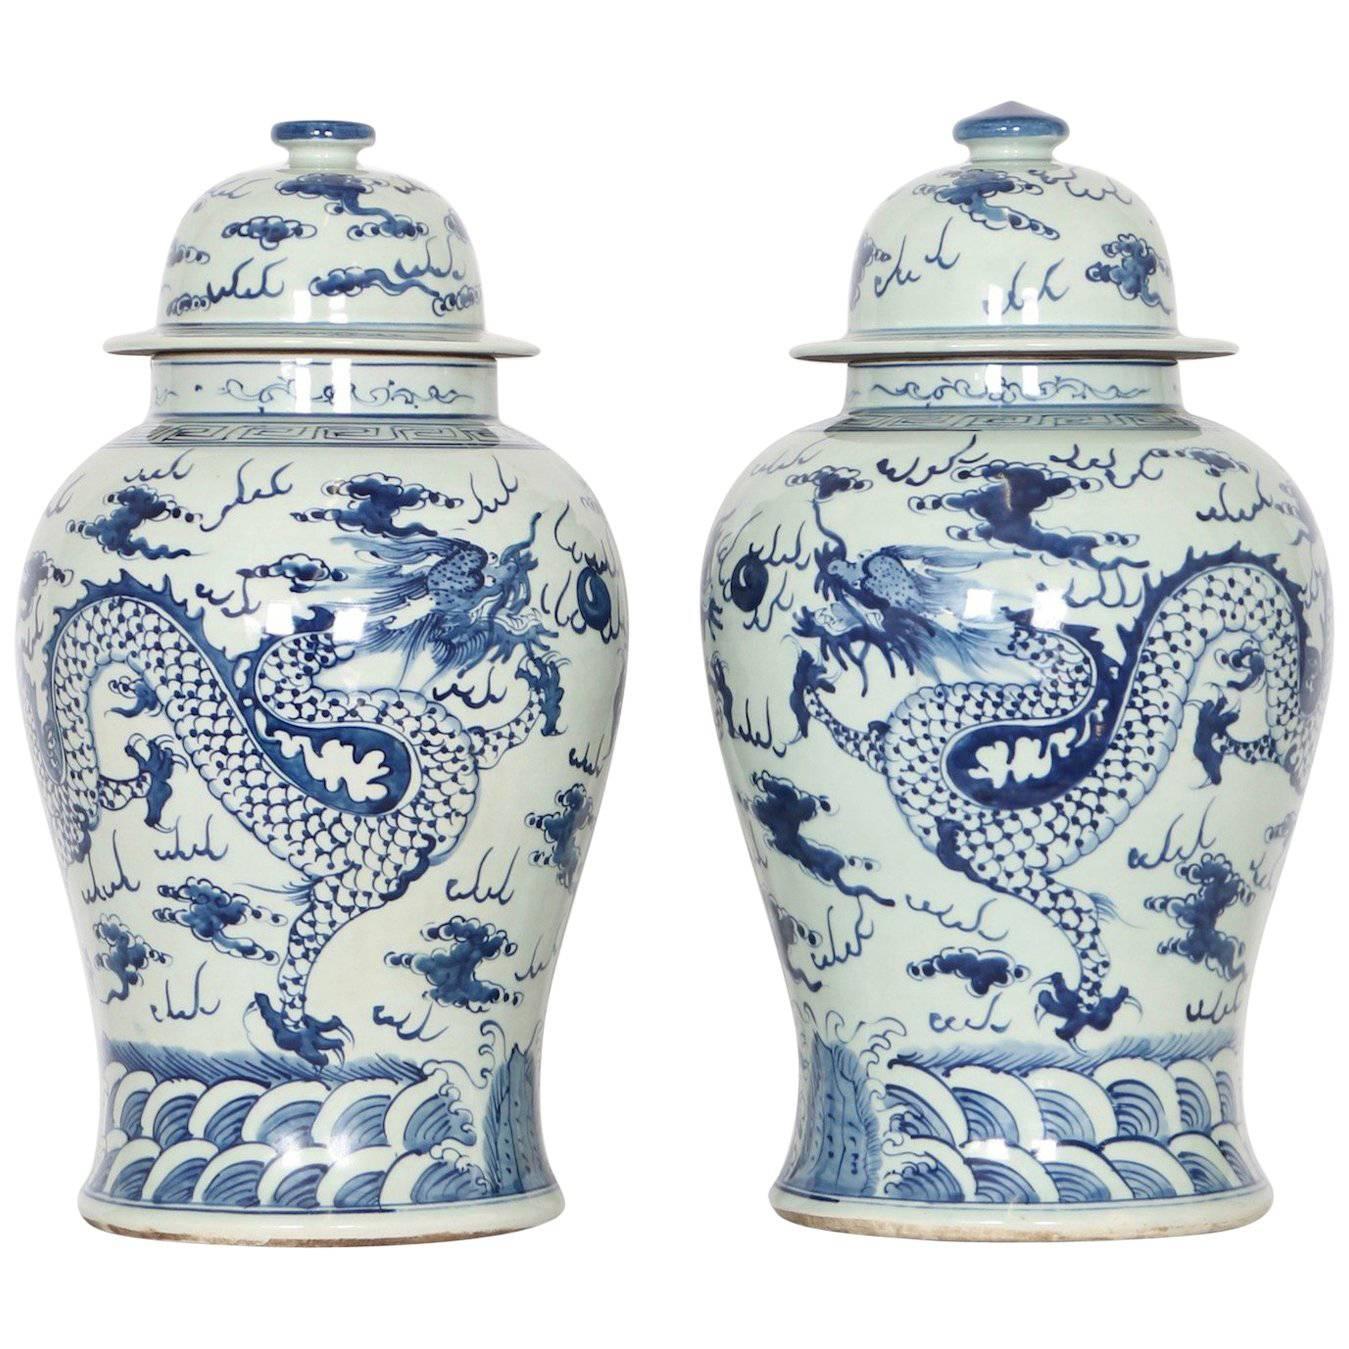 Chinese Export Ginger Jars in Blue and White